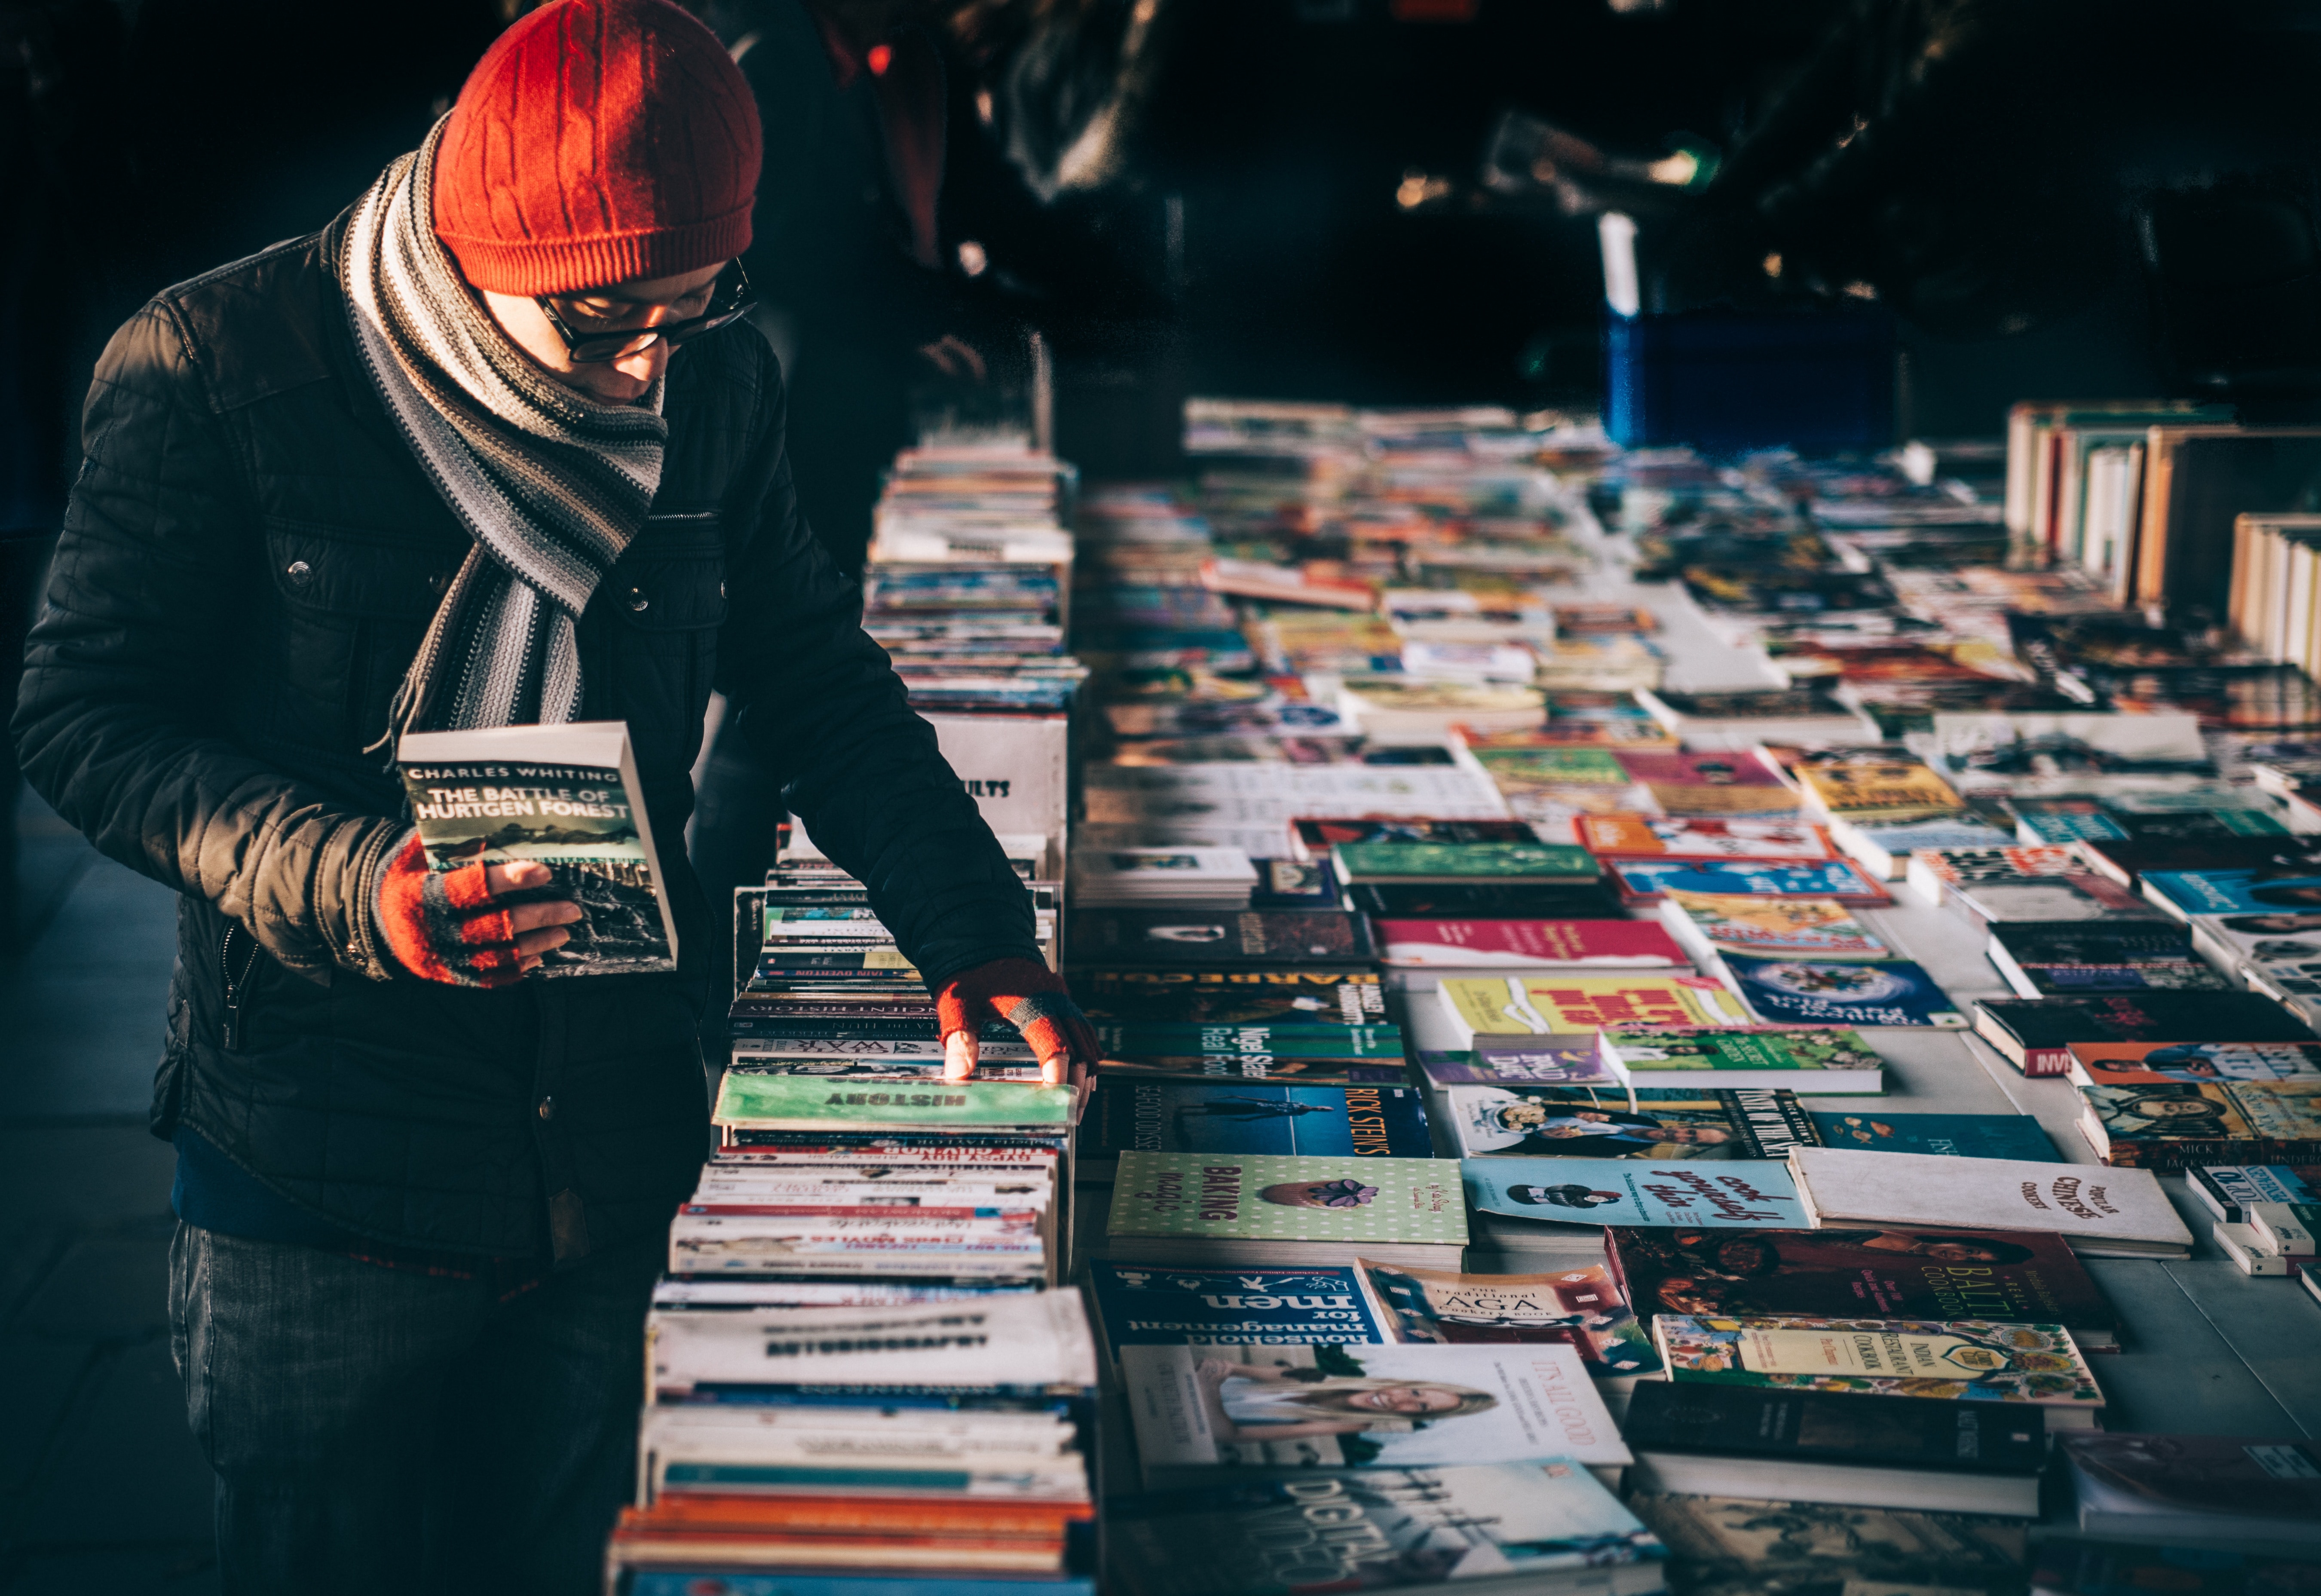 man in black coat and red knit cap wearing sunglasses holding book photo